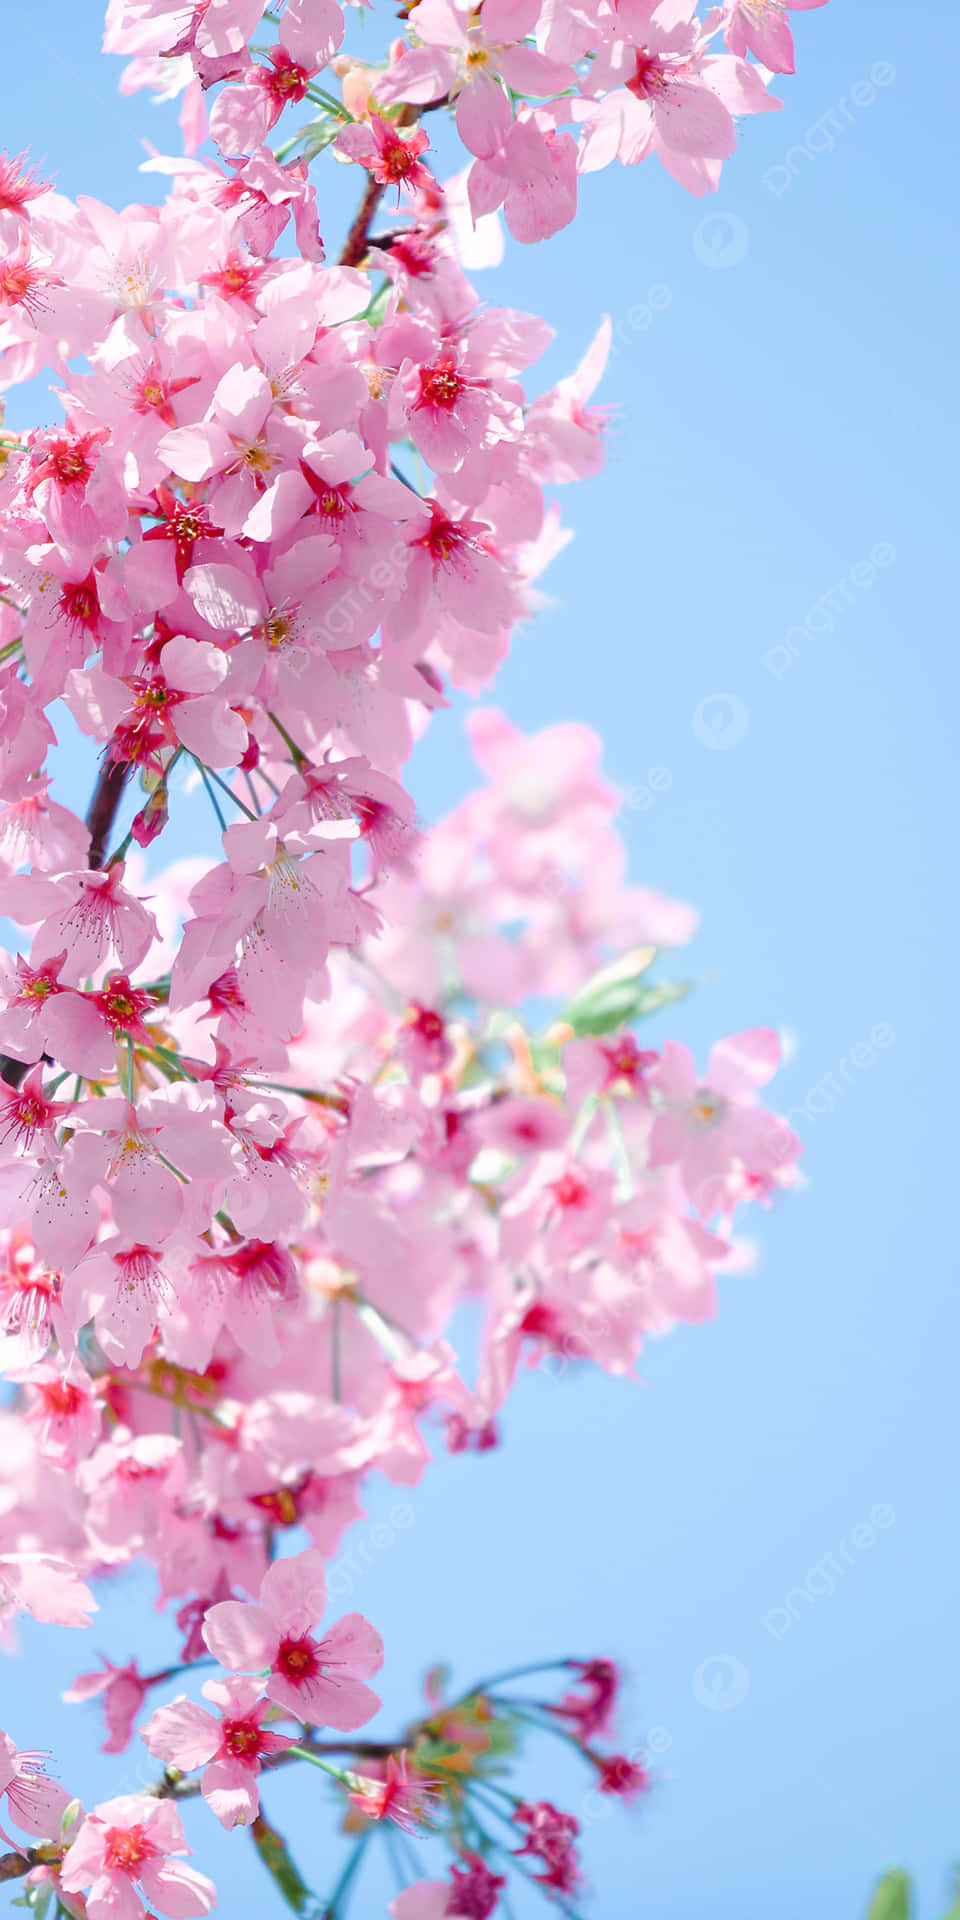 A brilliant display of pink cherry blossoms Wallpaper